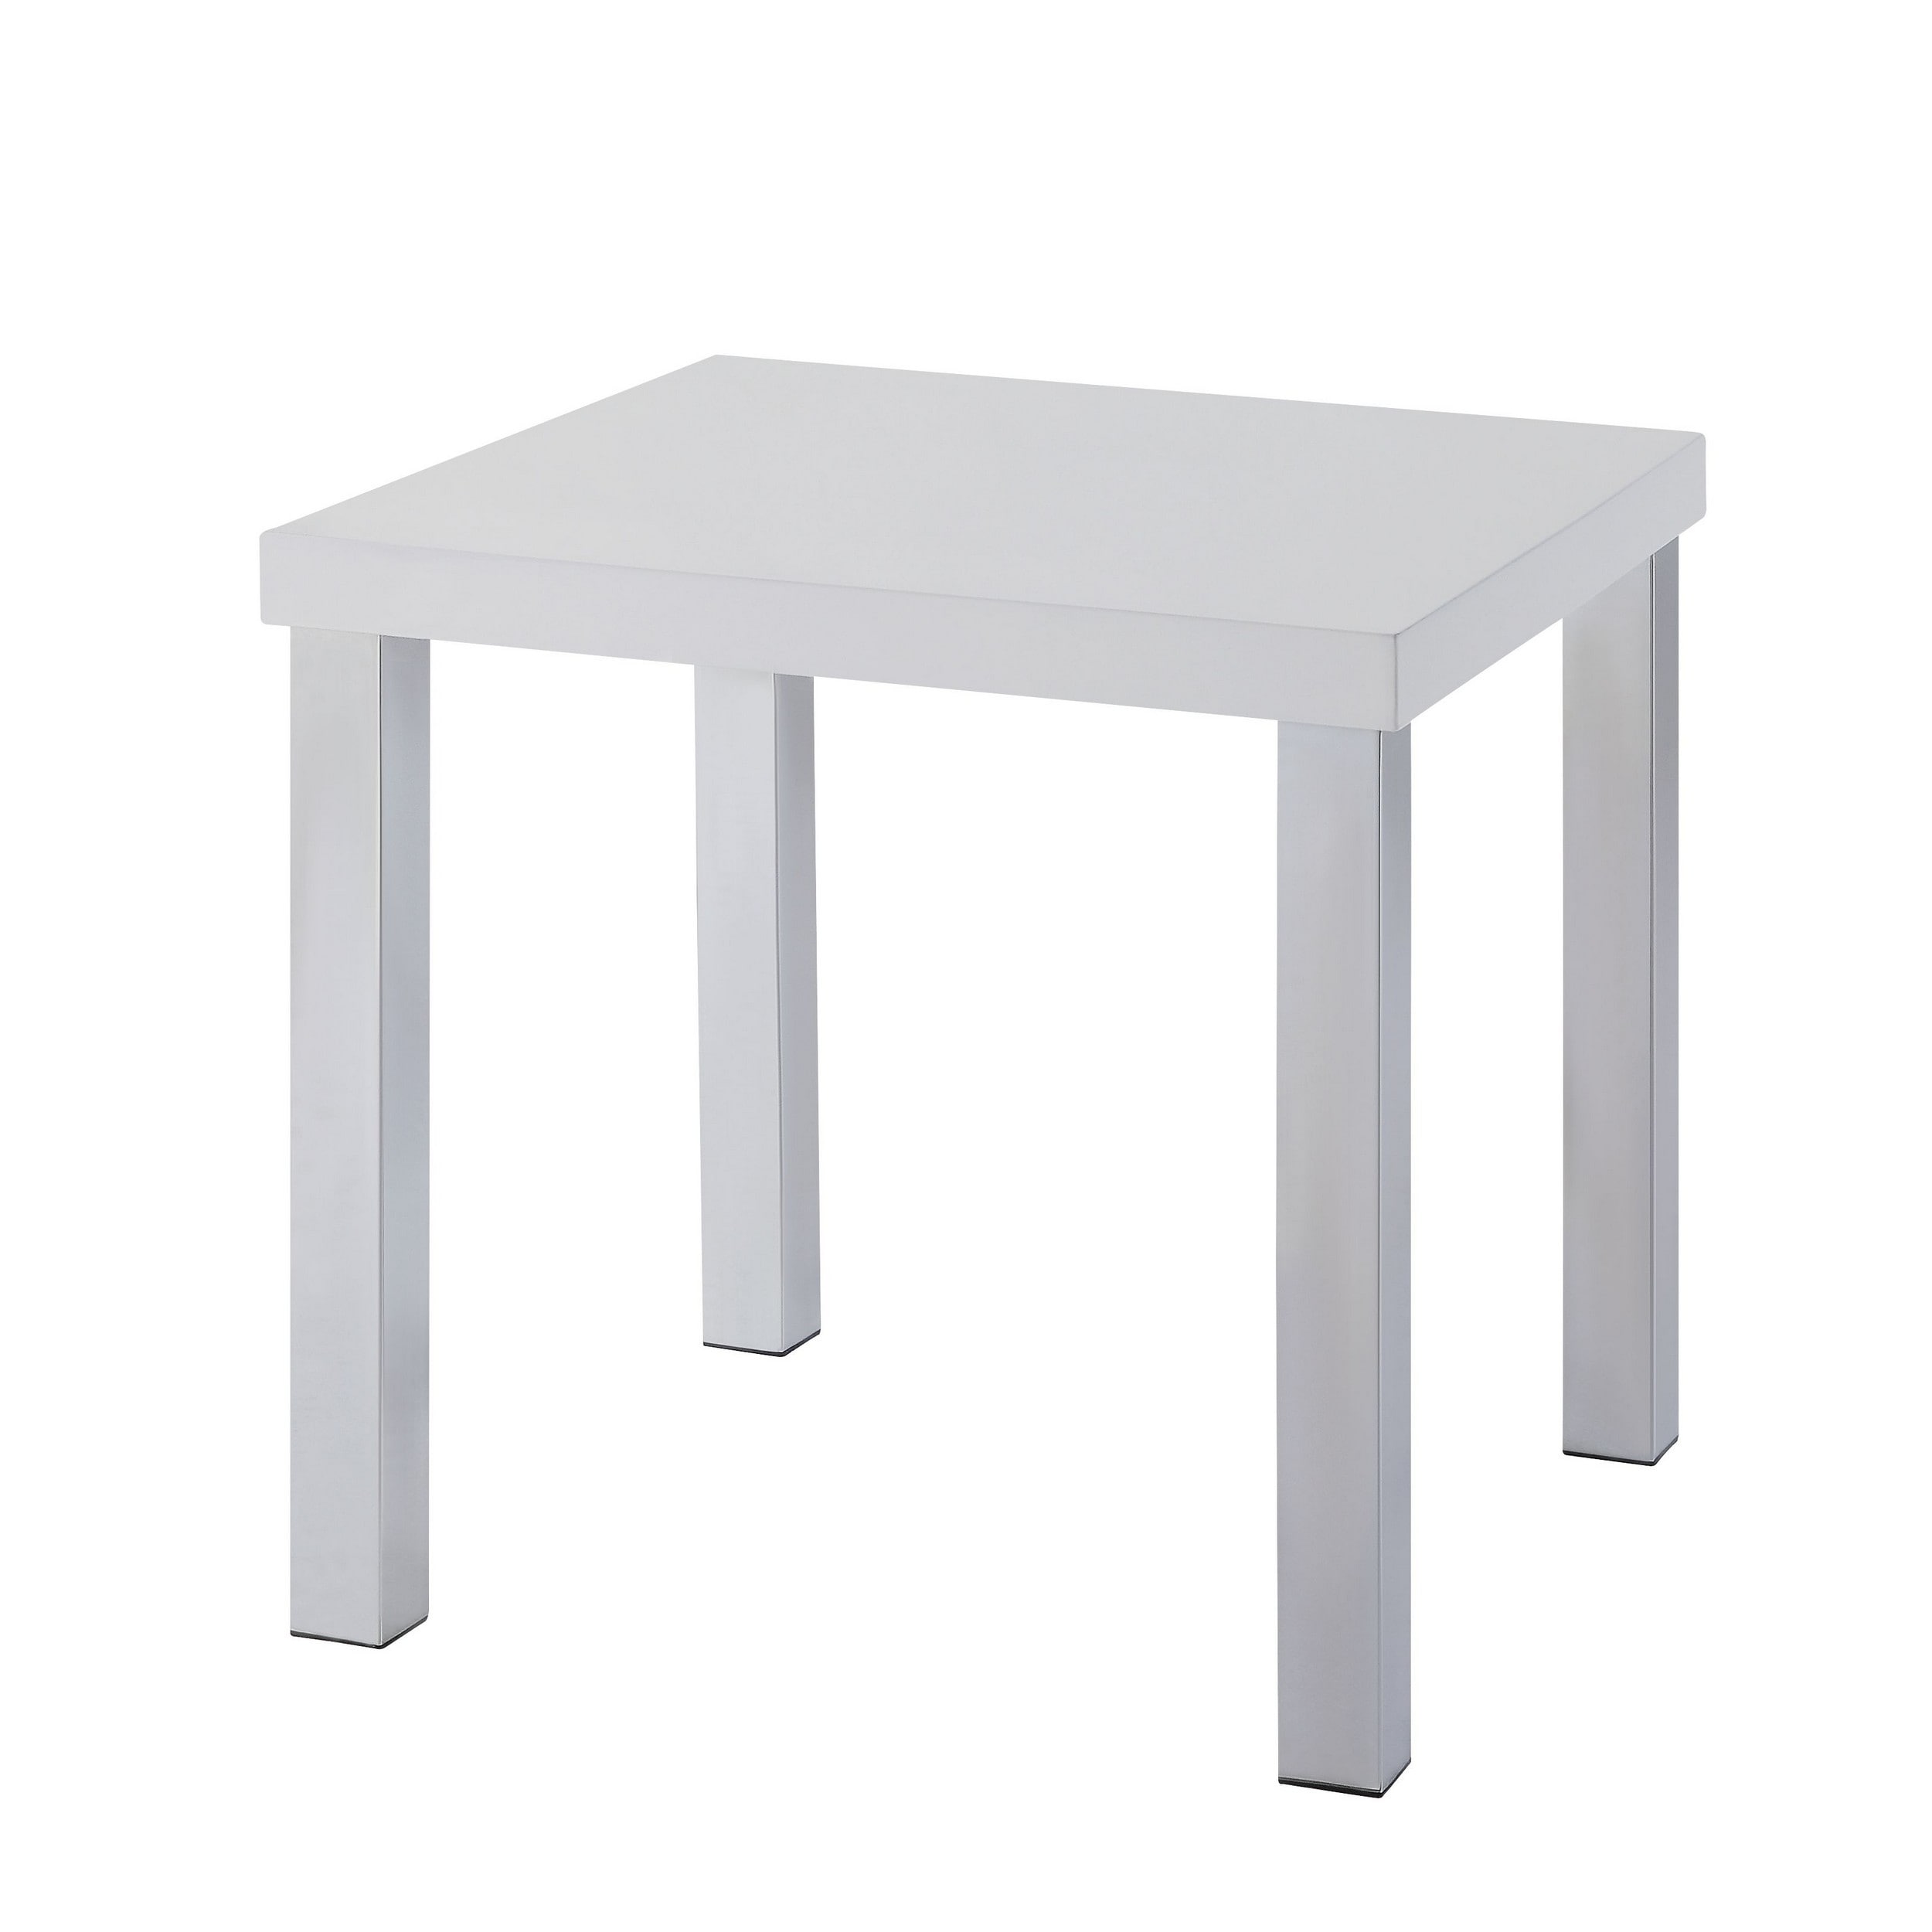 Square Wooden End Table With Straight Metal Legs, White And Chrome 22 H X 22 W X 22l Inches